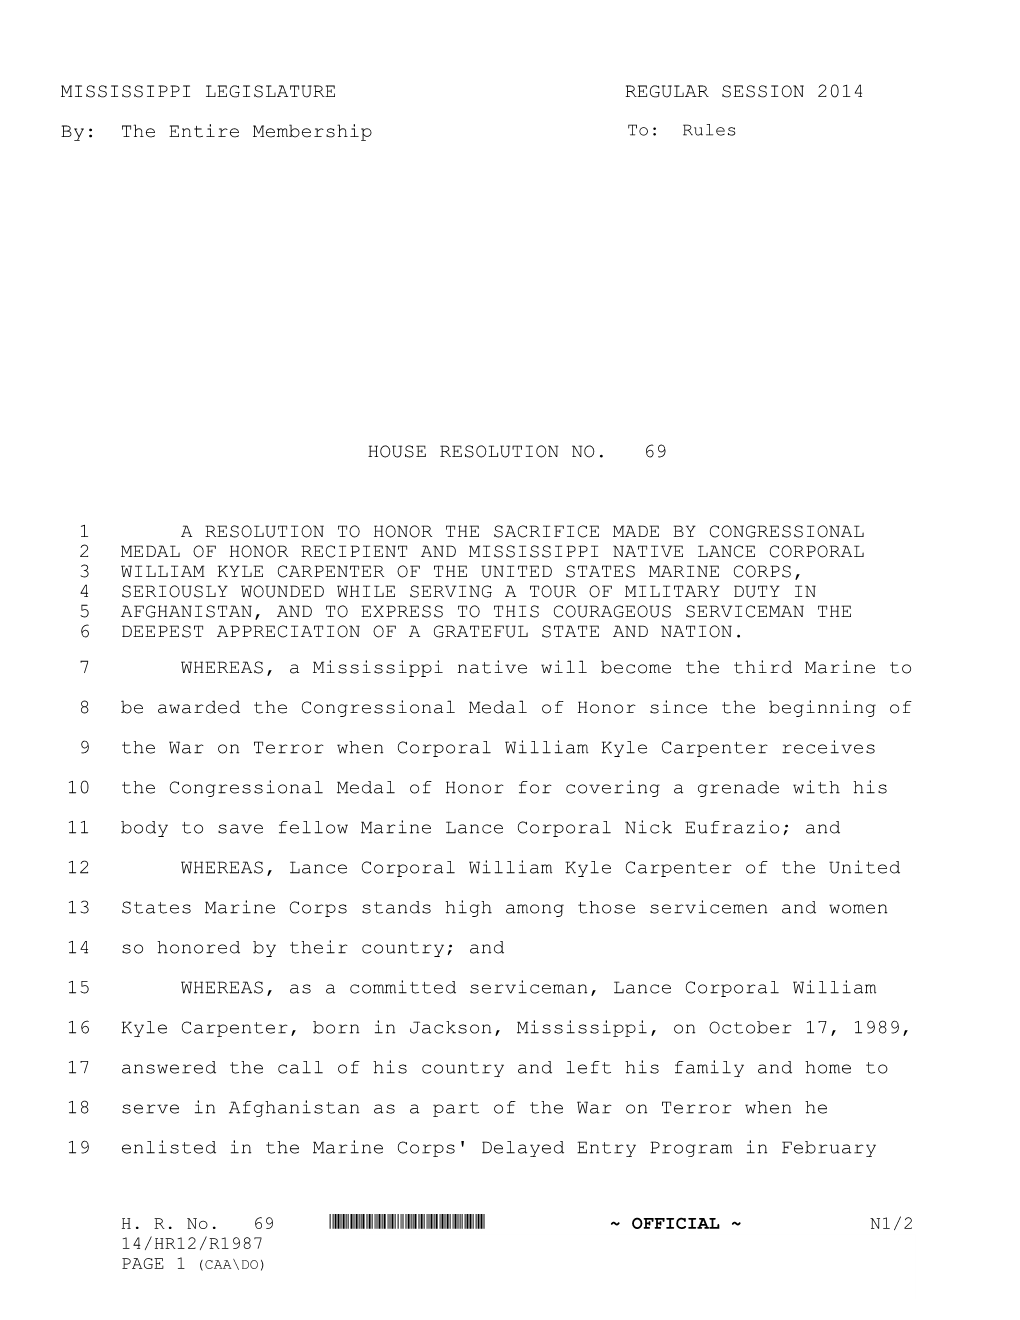 MISSISSIPPI LEGISLATURE REGULAR SESSION 2014 By: the Entire Membership HOUSE RESOLUTION NO. 69 a RESOLUTION to HONOR TH